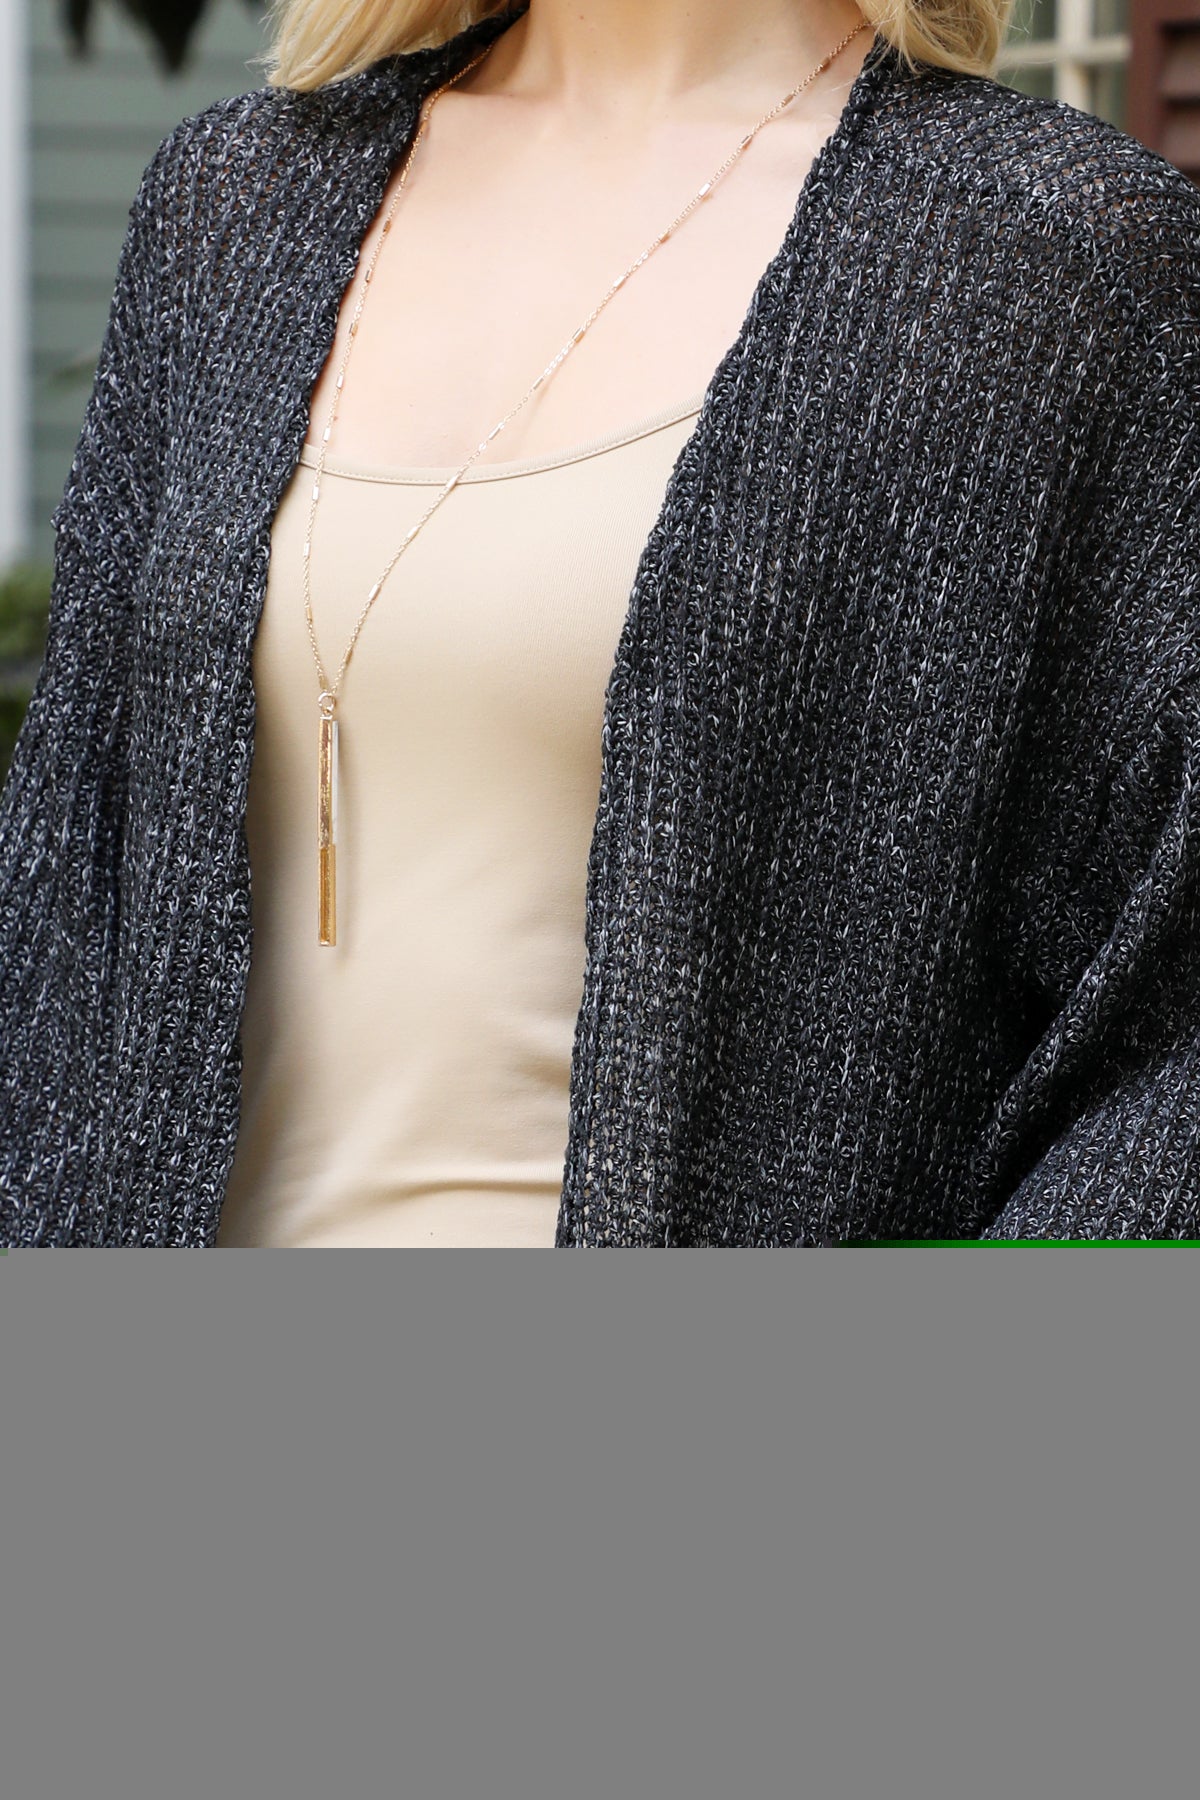 CHARCOAL LONG SLEEVE OPEN FRONT KNIT CARDIGAN 2-2-2